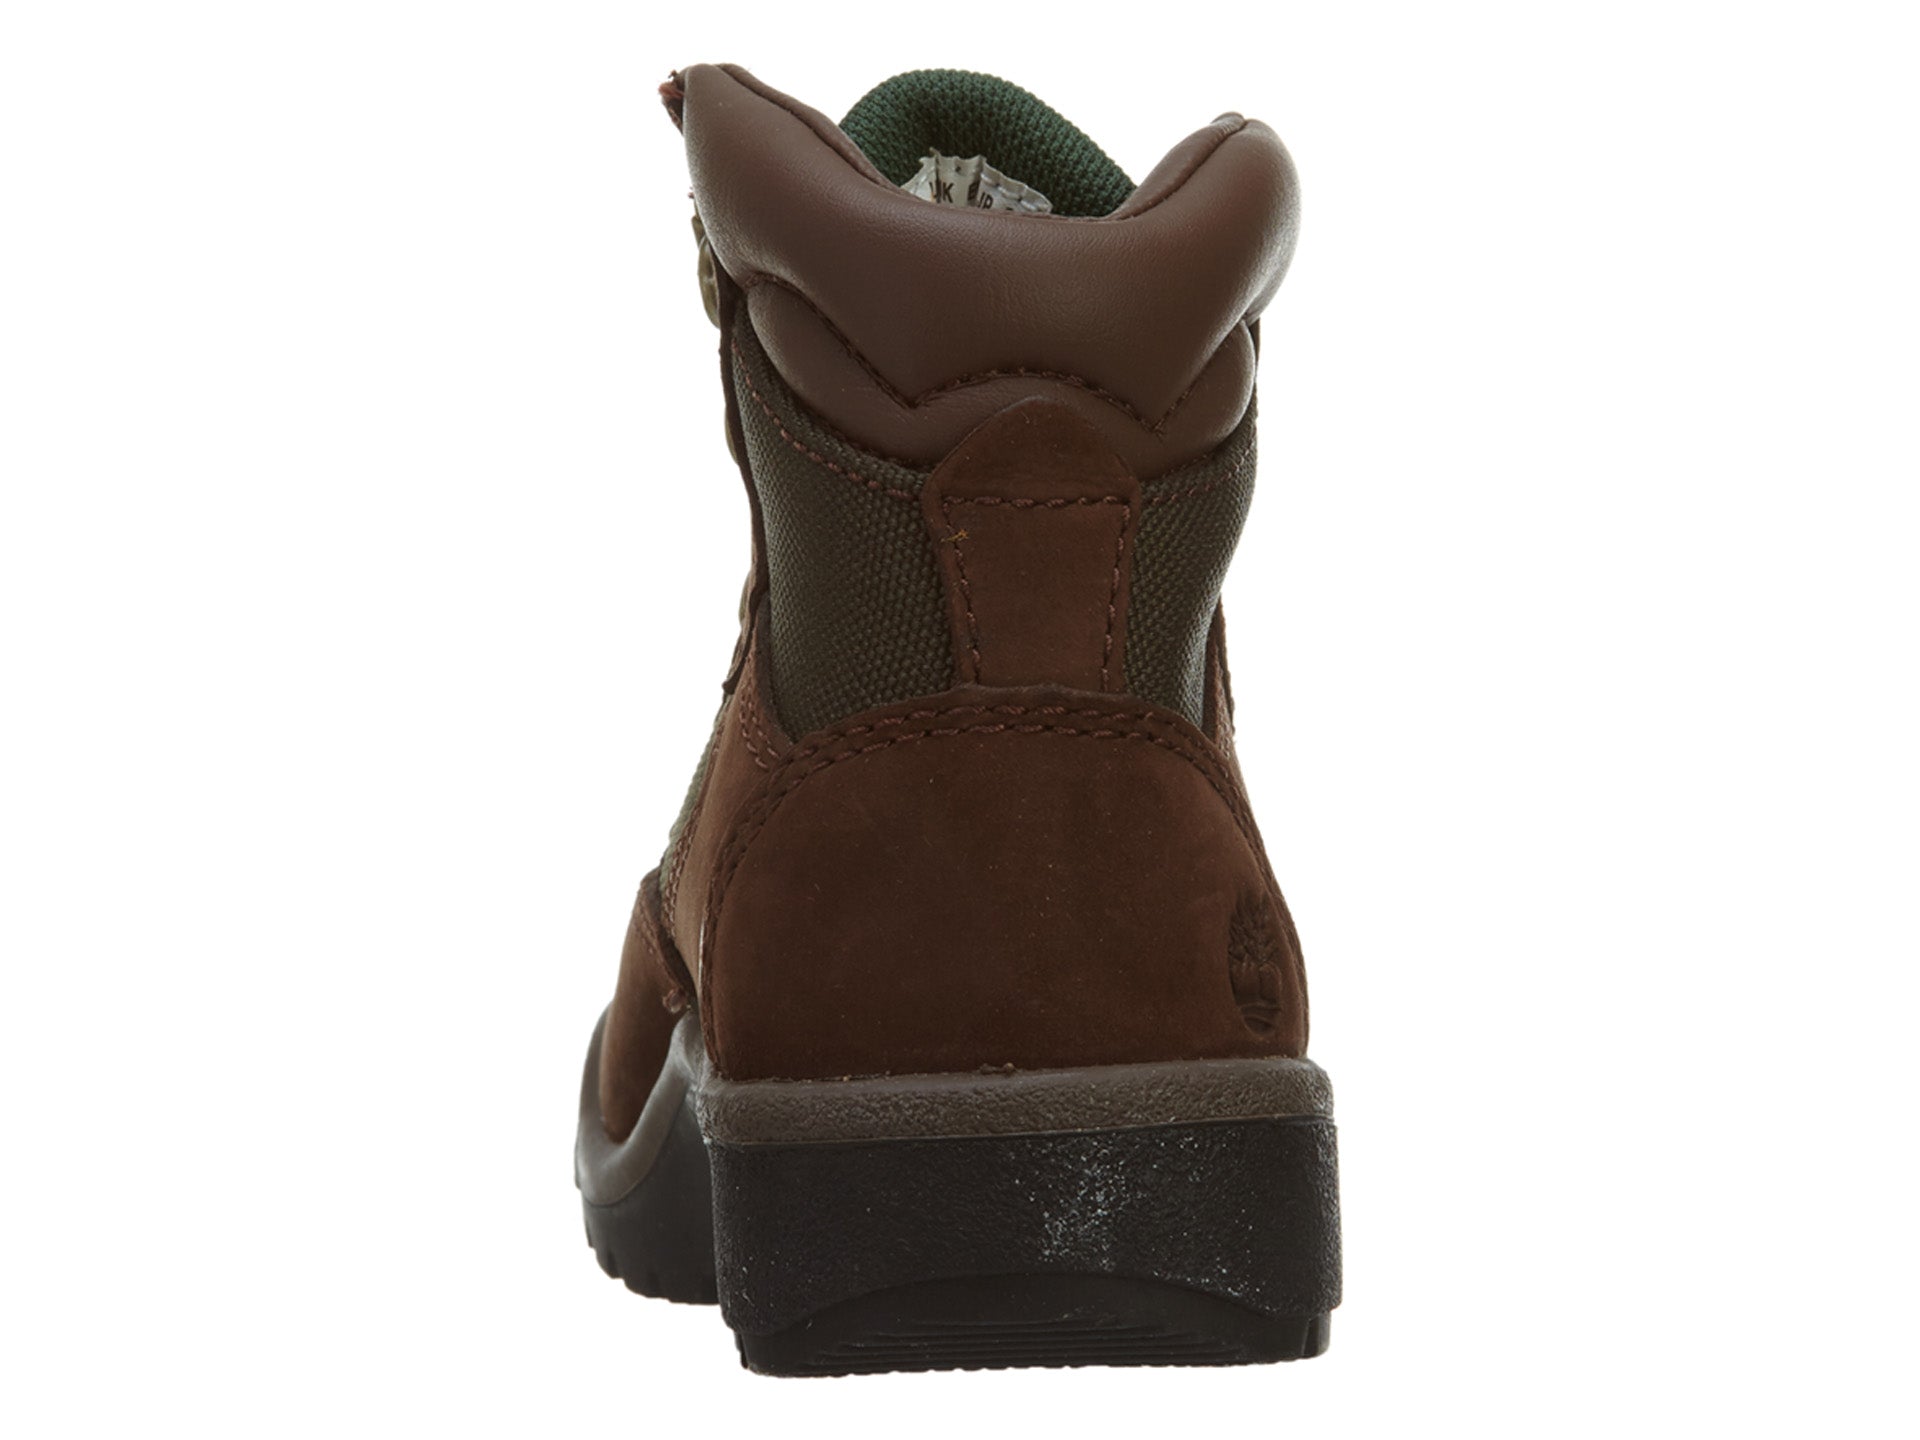 TIMBERLAND 6IN F/L FIELD BOOT TODDLERS Style# 44892